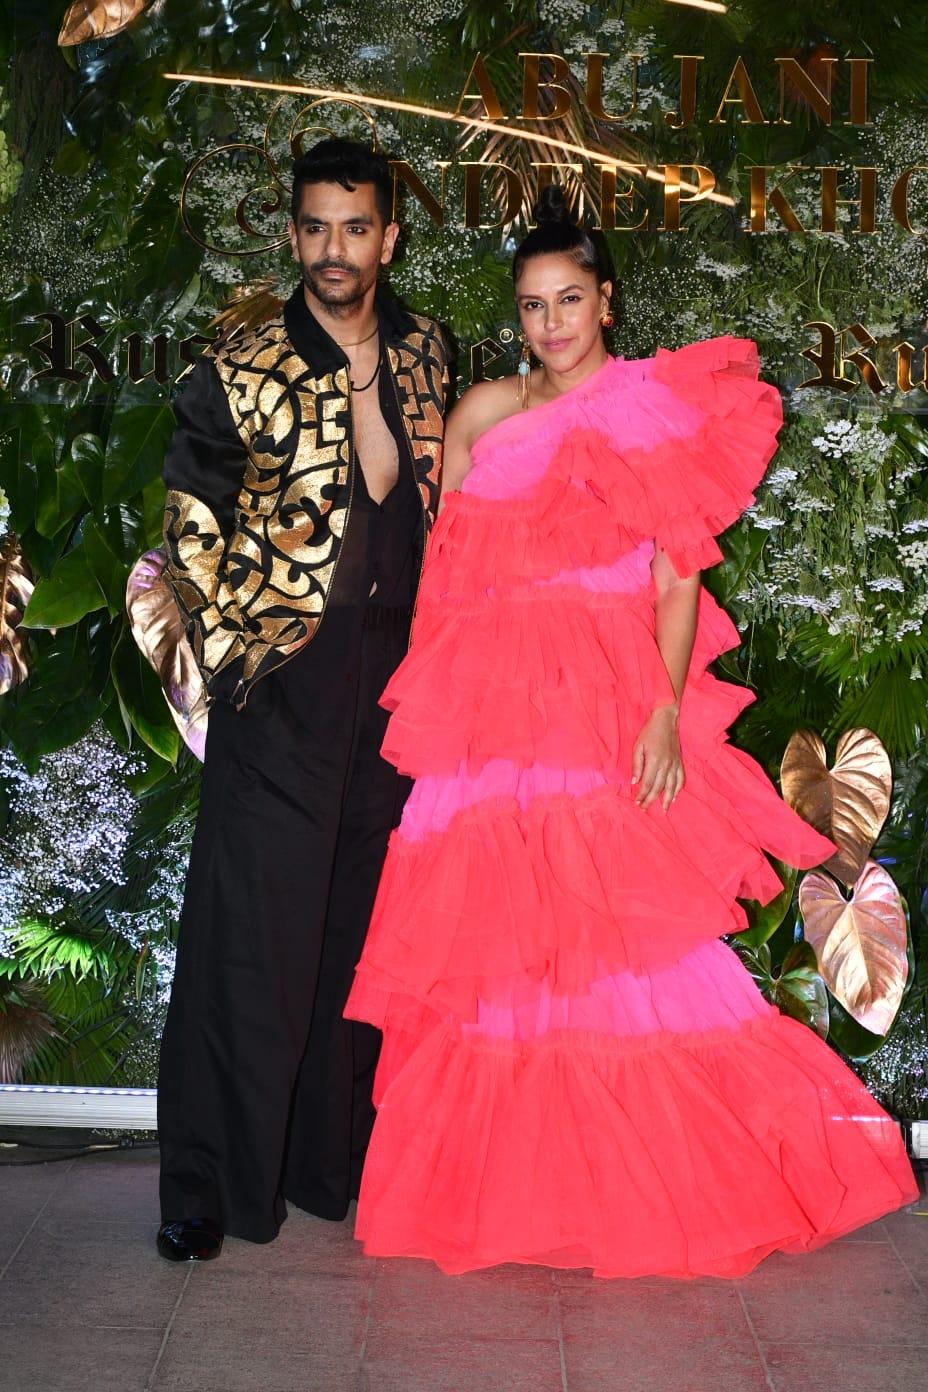 The celebrity couple Neha Dhupia and Angad Bedi opted for a contrasting look where Dhupia wore an eccentric dual toned dress styled with a sleek high bun and Angad wore an all-black ensemble, topped with a gold detailed black jacket and a subtle kajal for the eyes. 